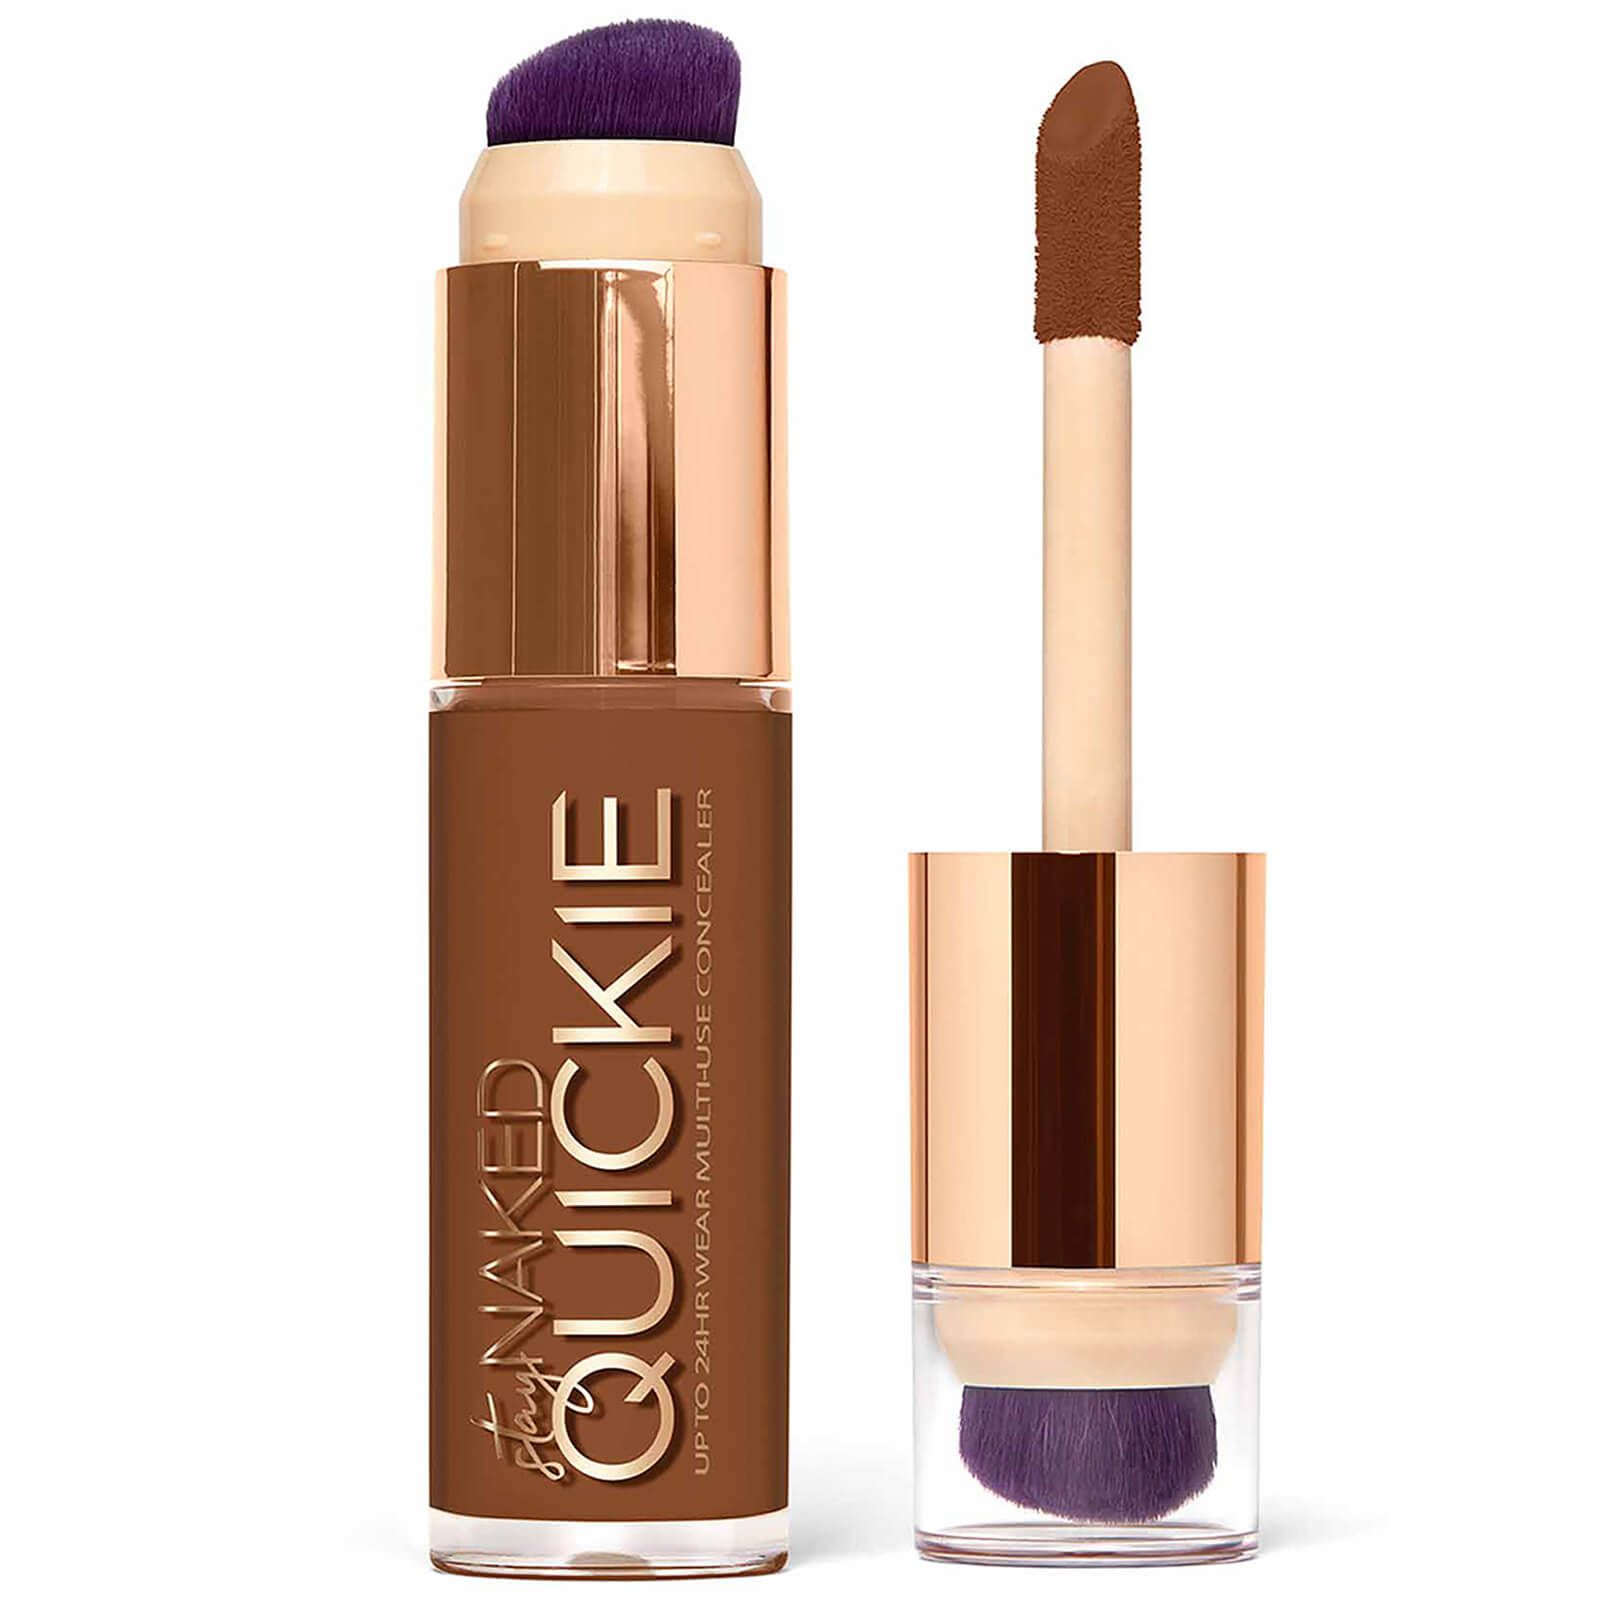 Urban Decay Stay Naked Quickie Concealer 16.4ml (Various Shades) - 80NN von Urban Decay